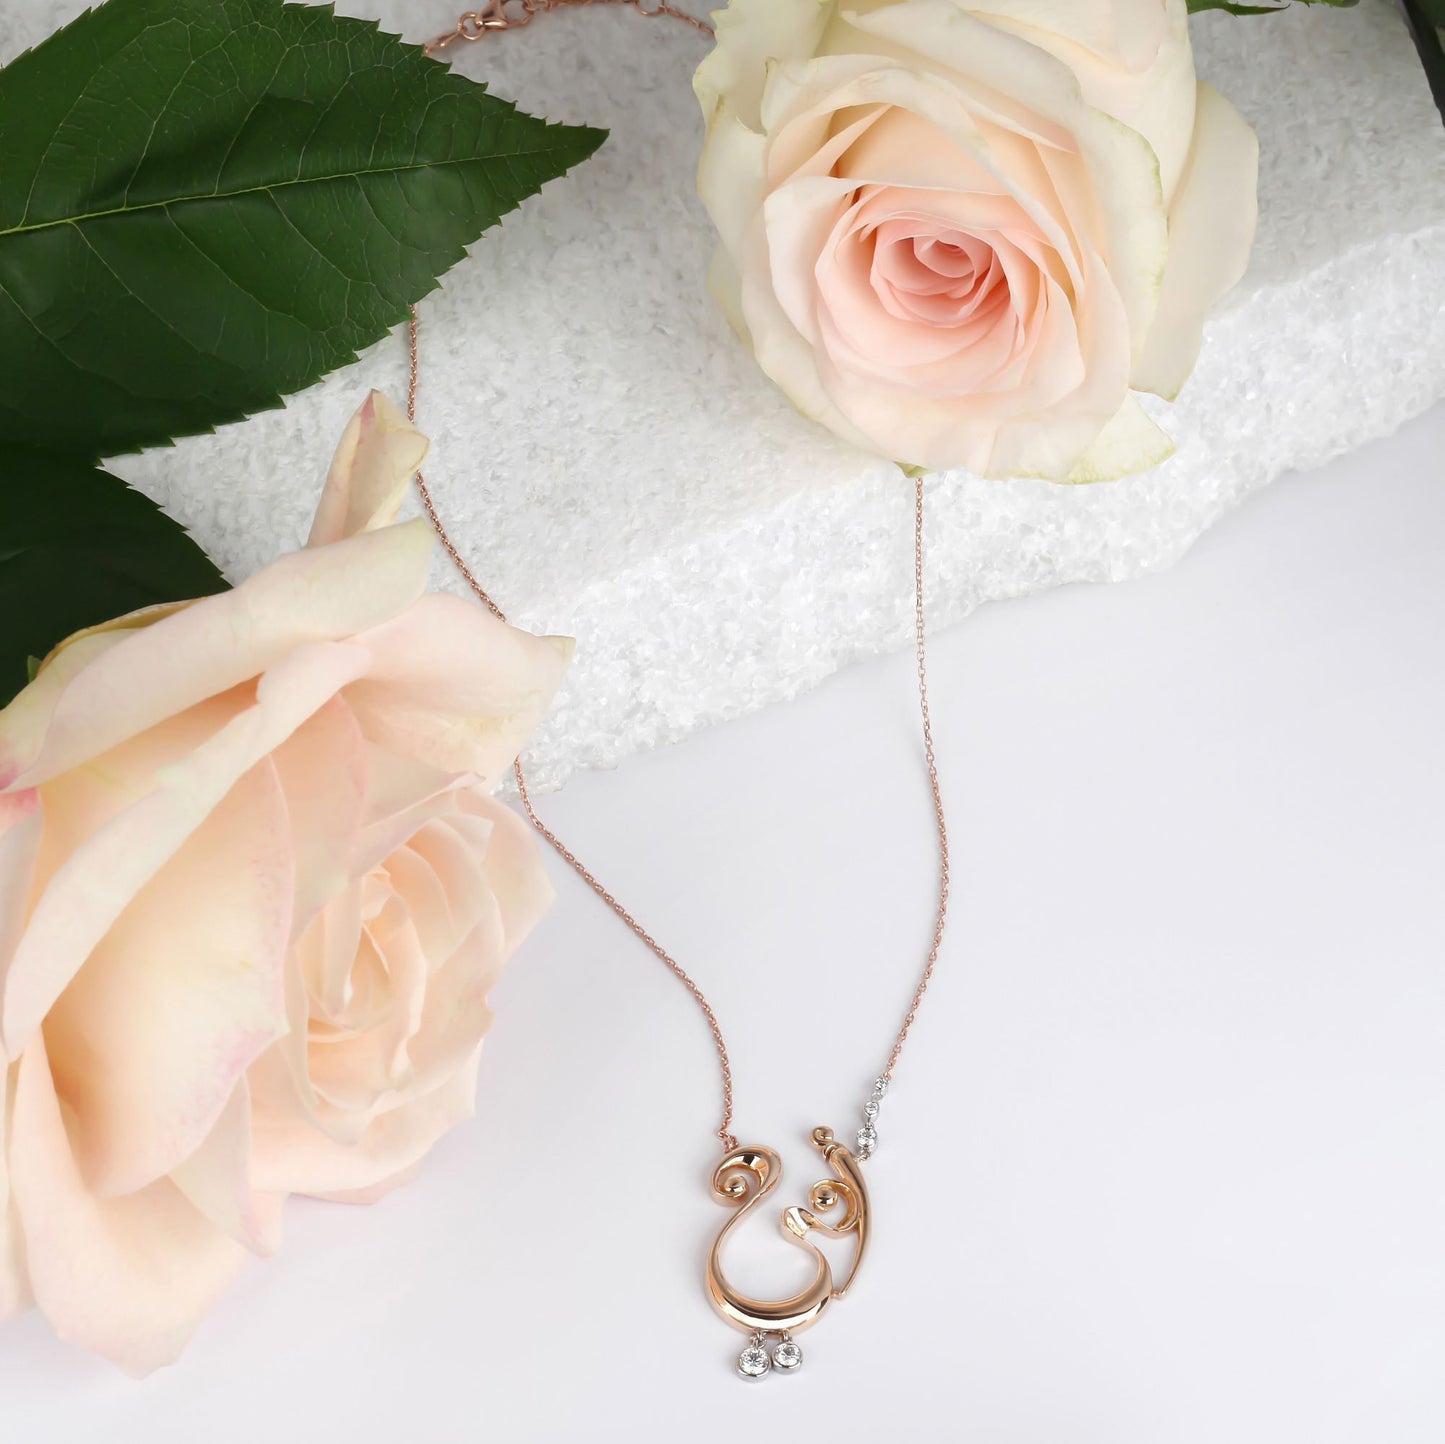 The Mothers' Day Edition - Custom Arabic Letter "Mother" Rose Gold & Diamond Necklace | Diamond Necklace